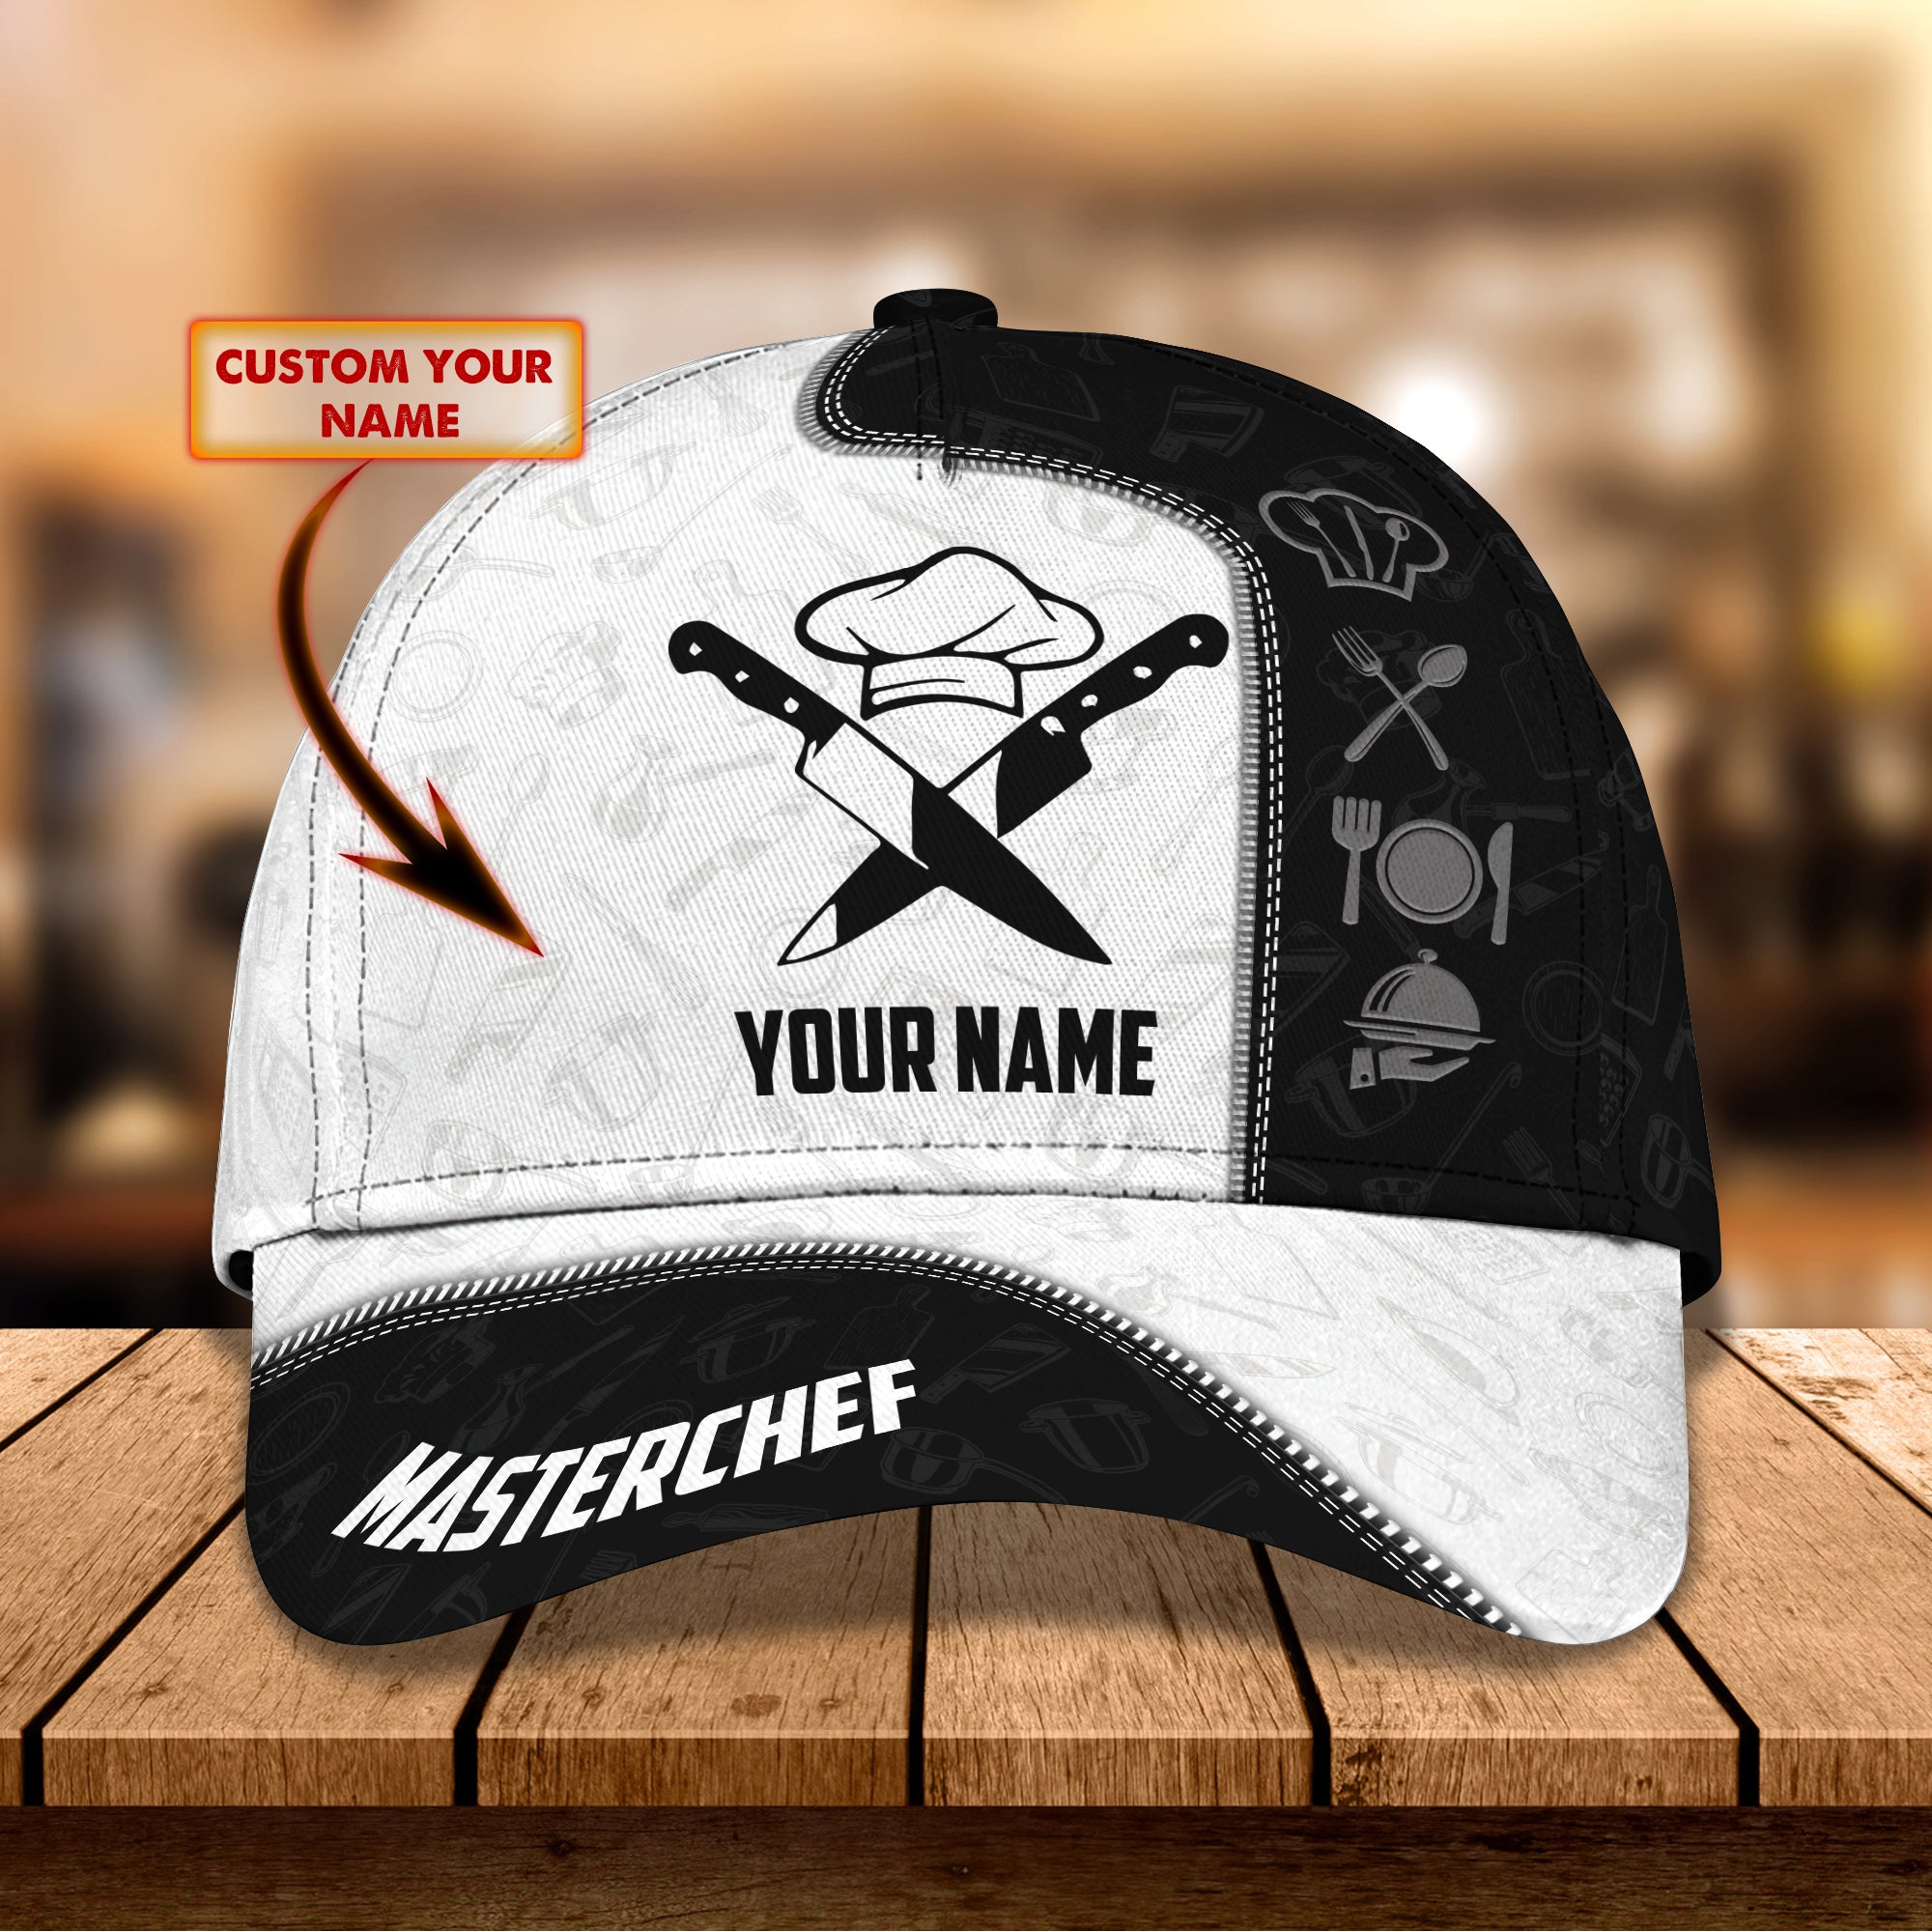 CHEF 02 - Personalized Name Cap - Ntt68